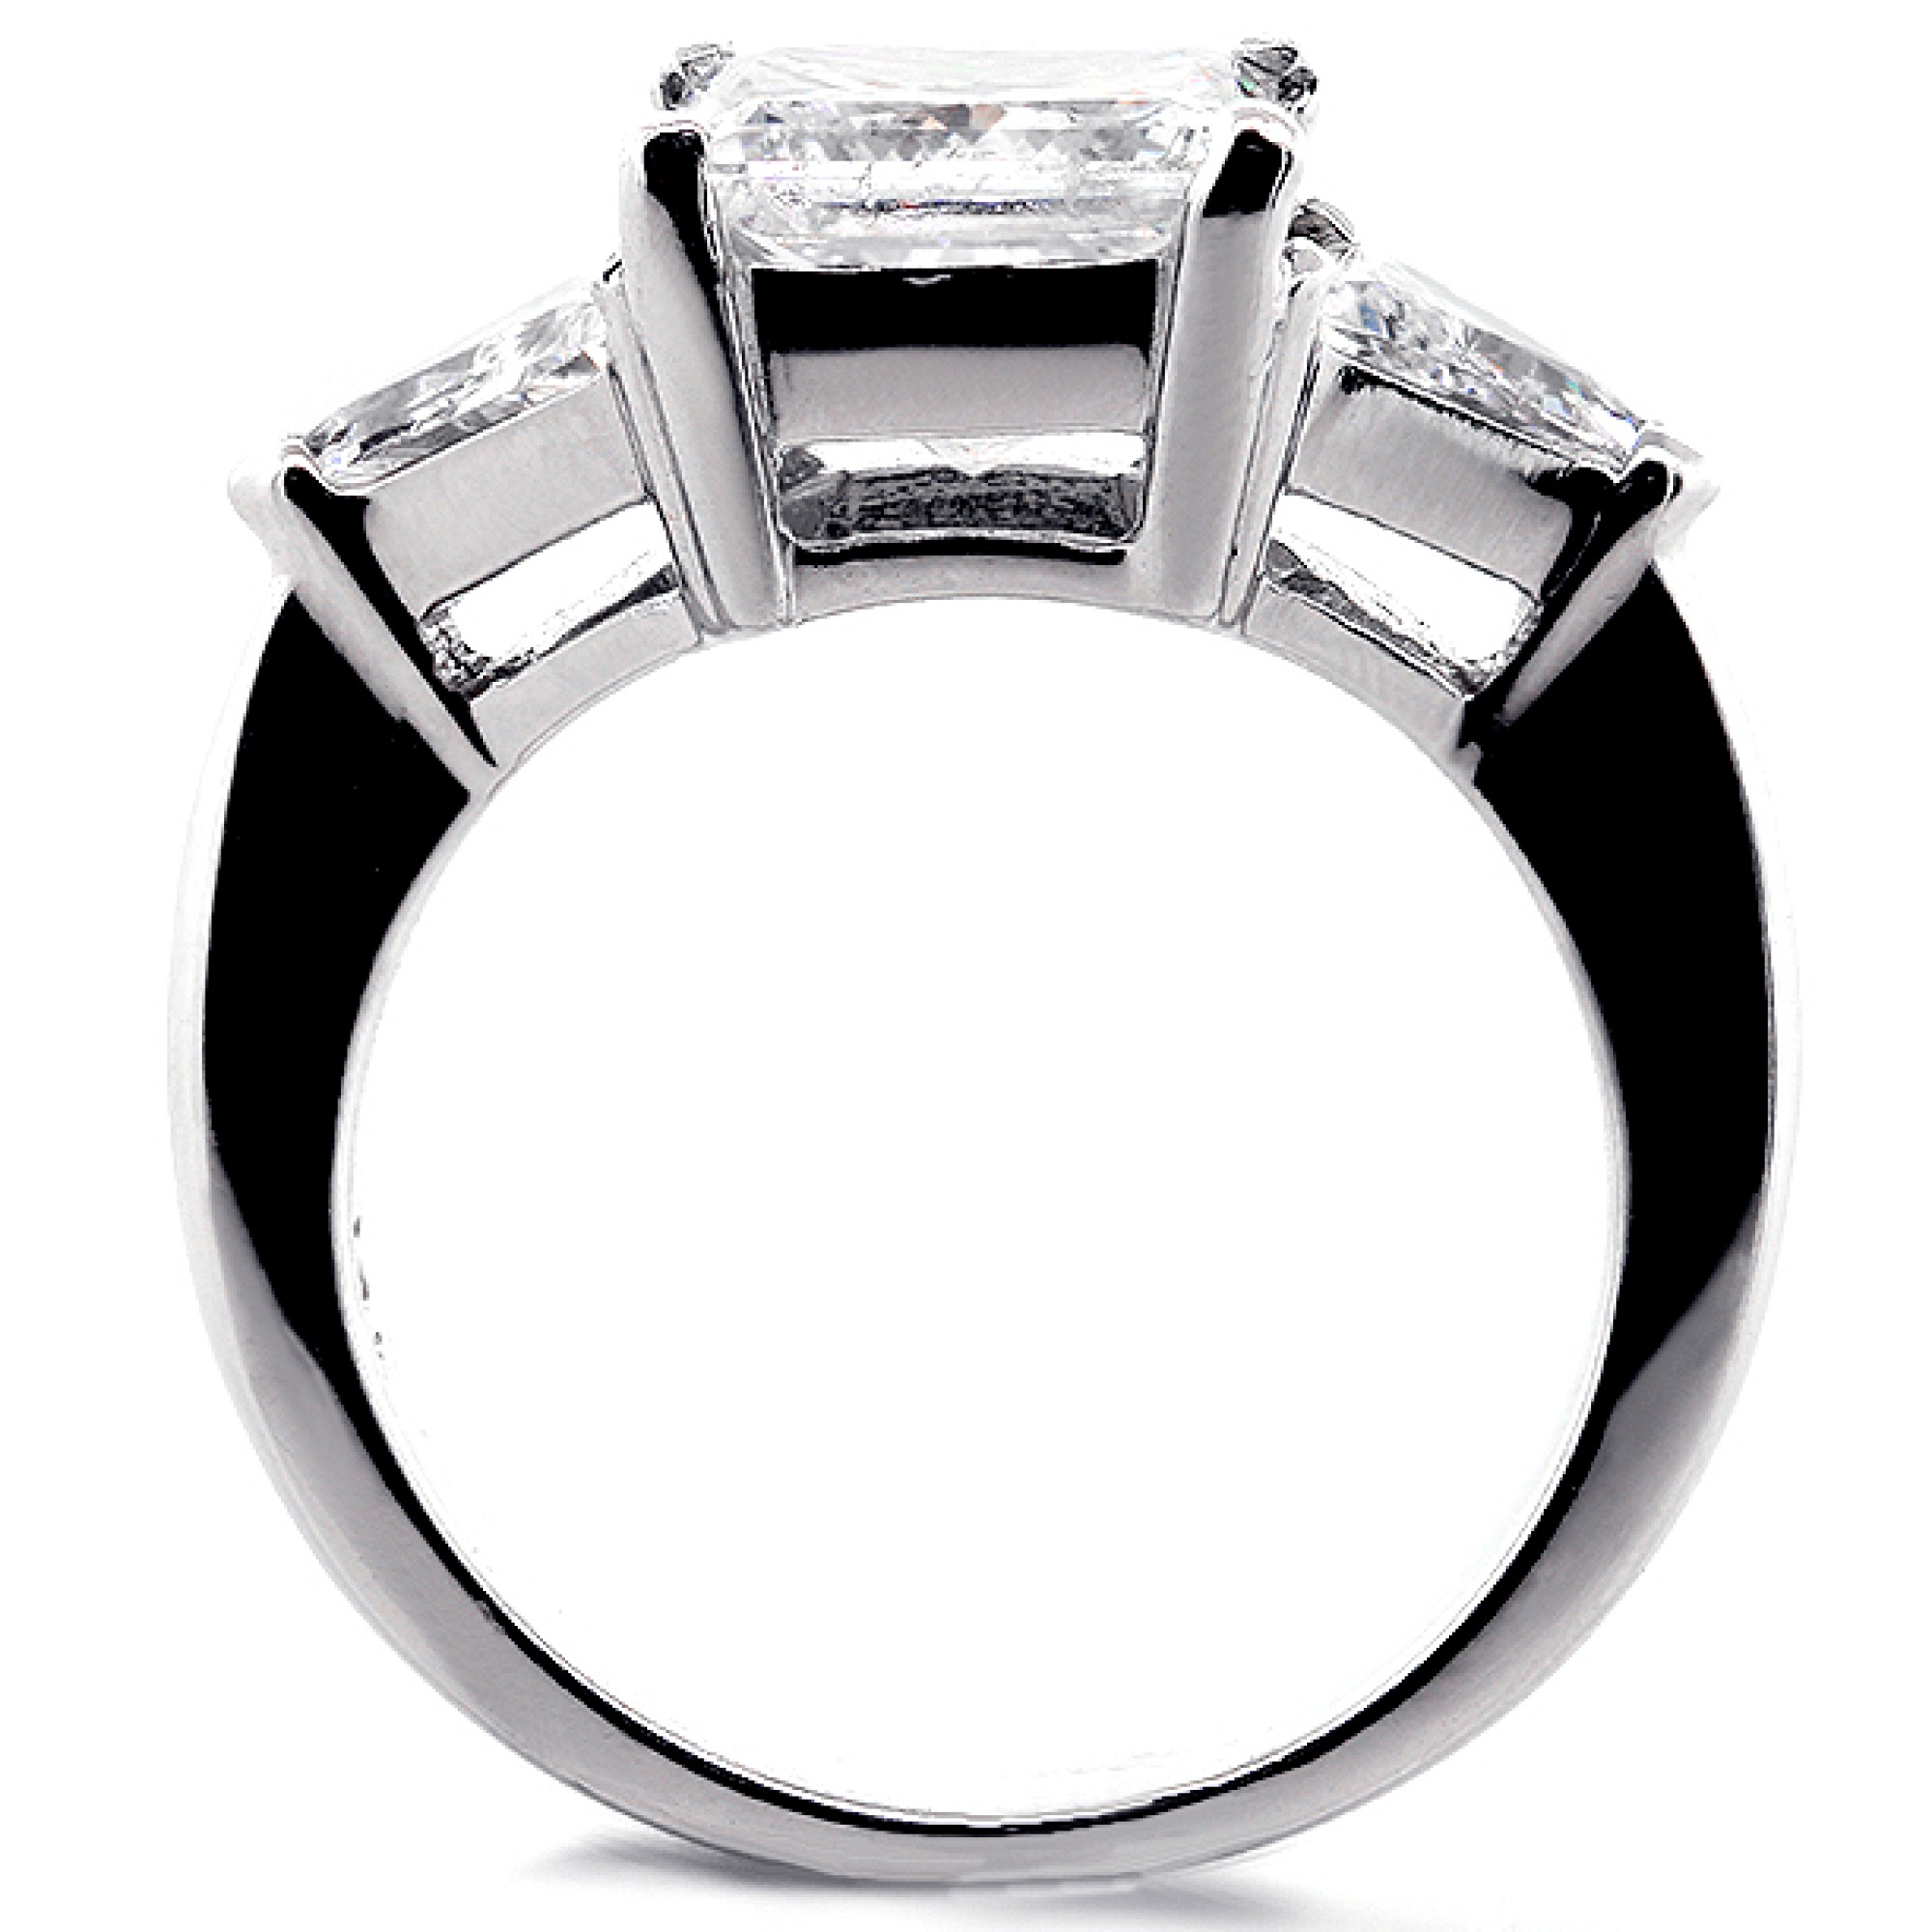 Princess Cut Engagement Ring with Trillion Side Stones